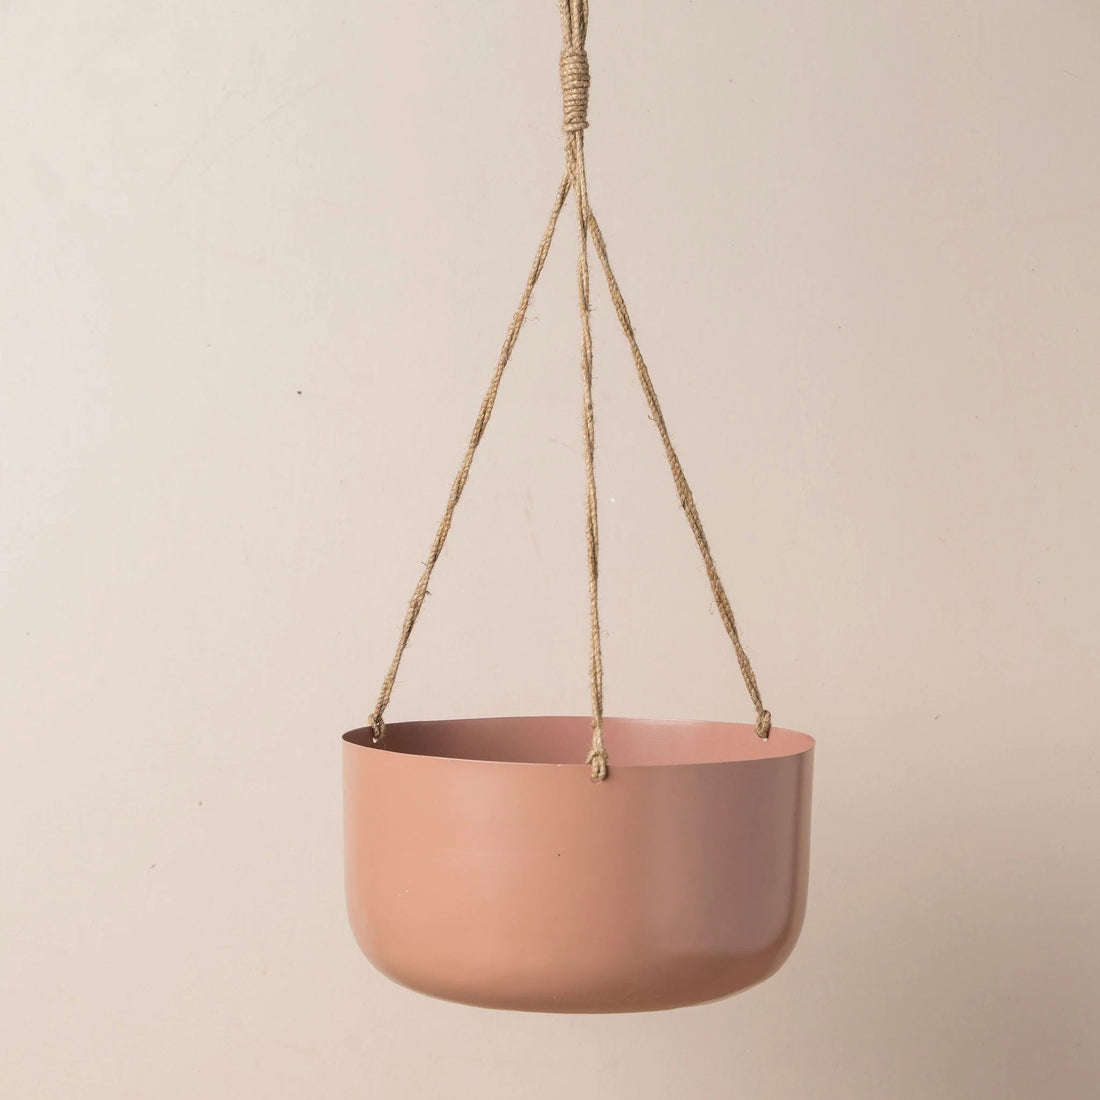 Yaamur Metal Hanging Planter - The Flower Crate